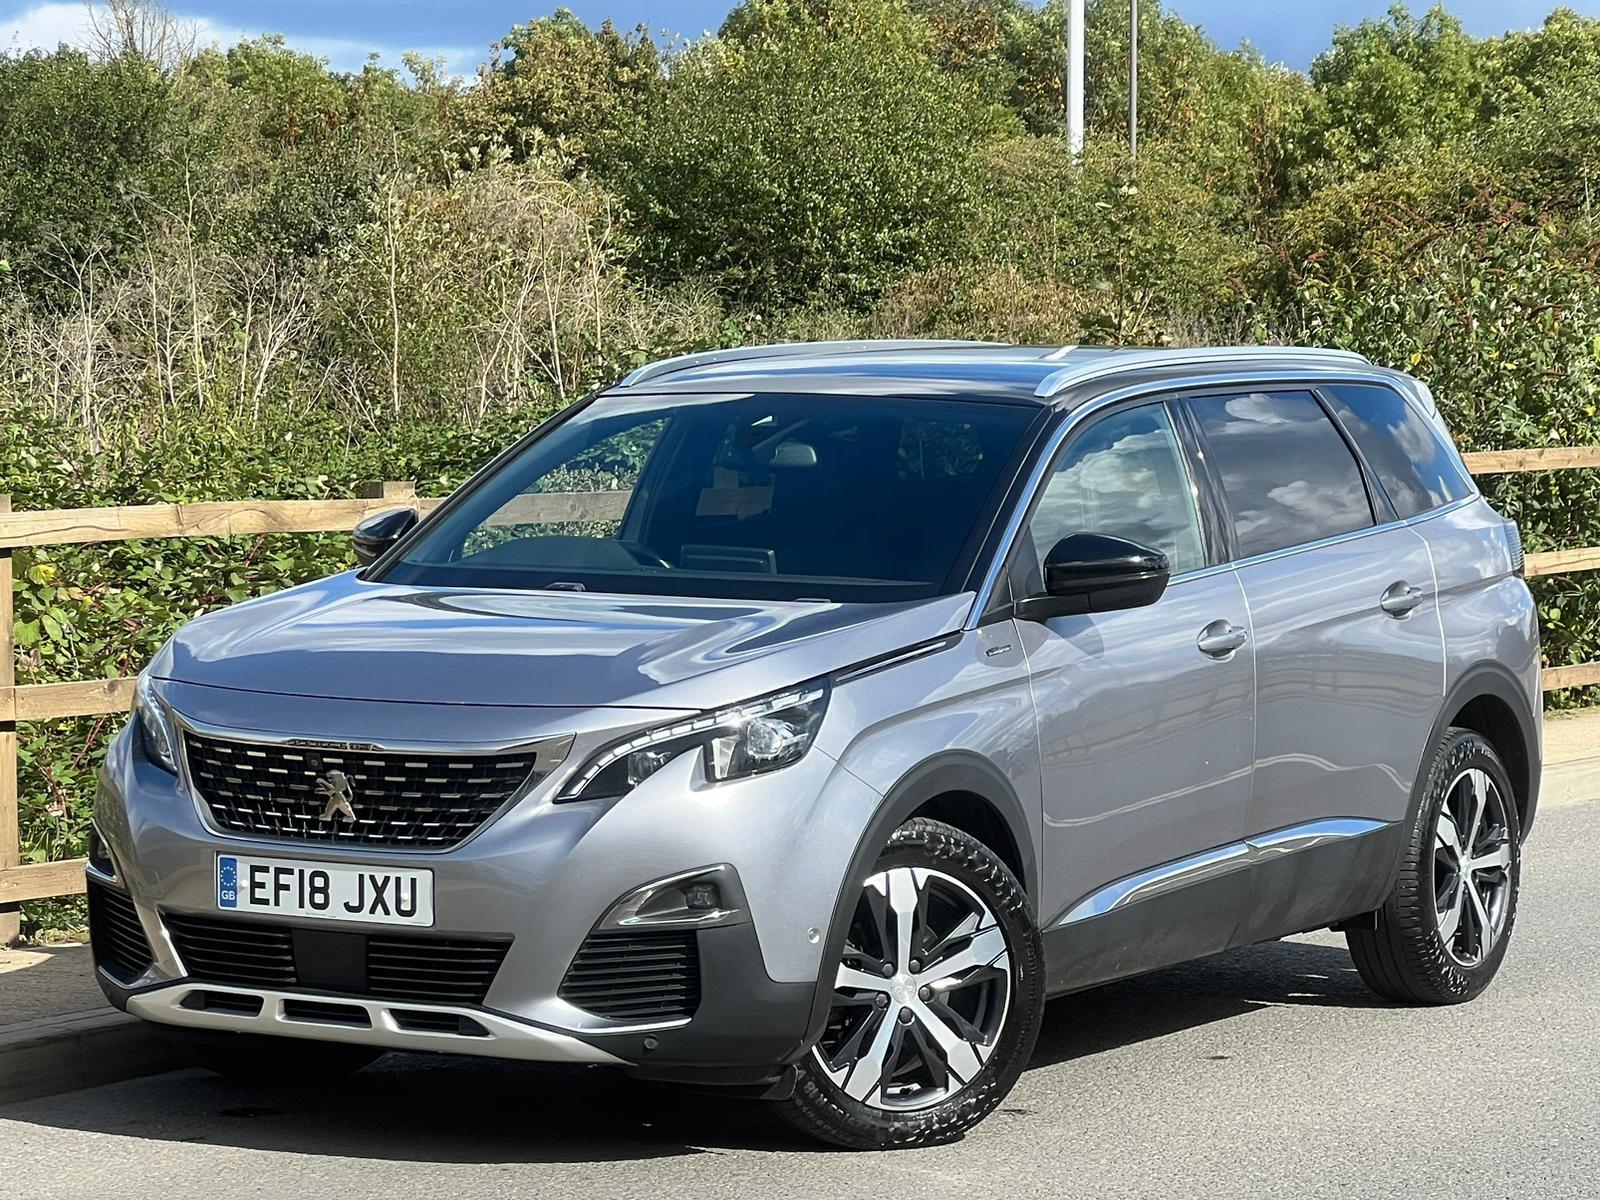 Peugeot 5008: Most Up-to-Date Encyclopedia, News & Reviews